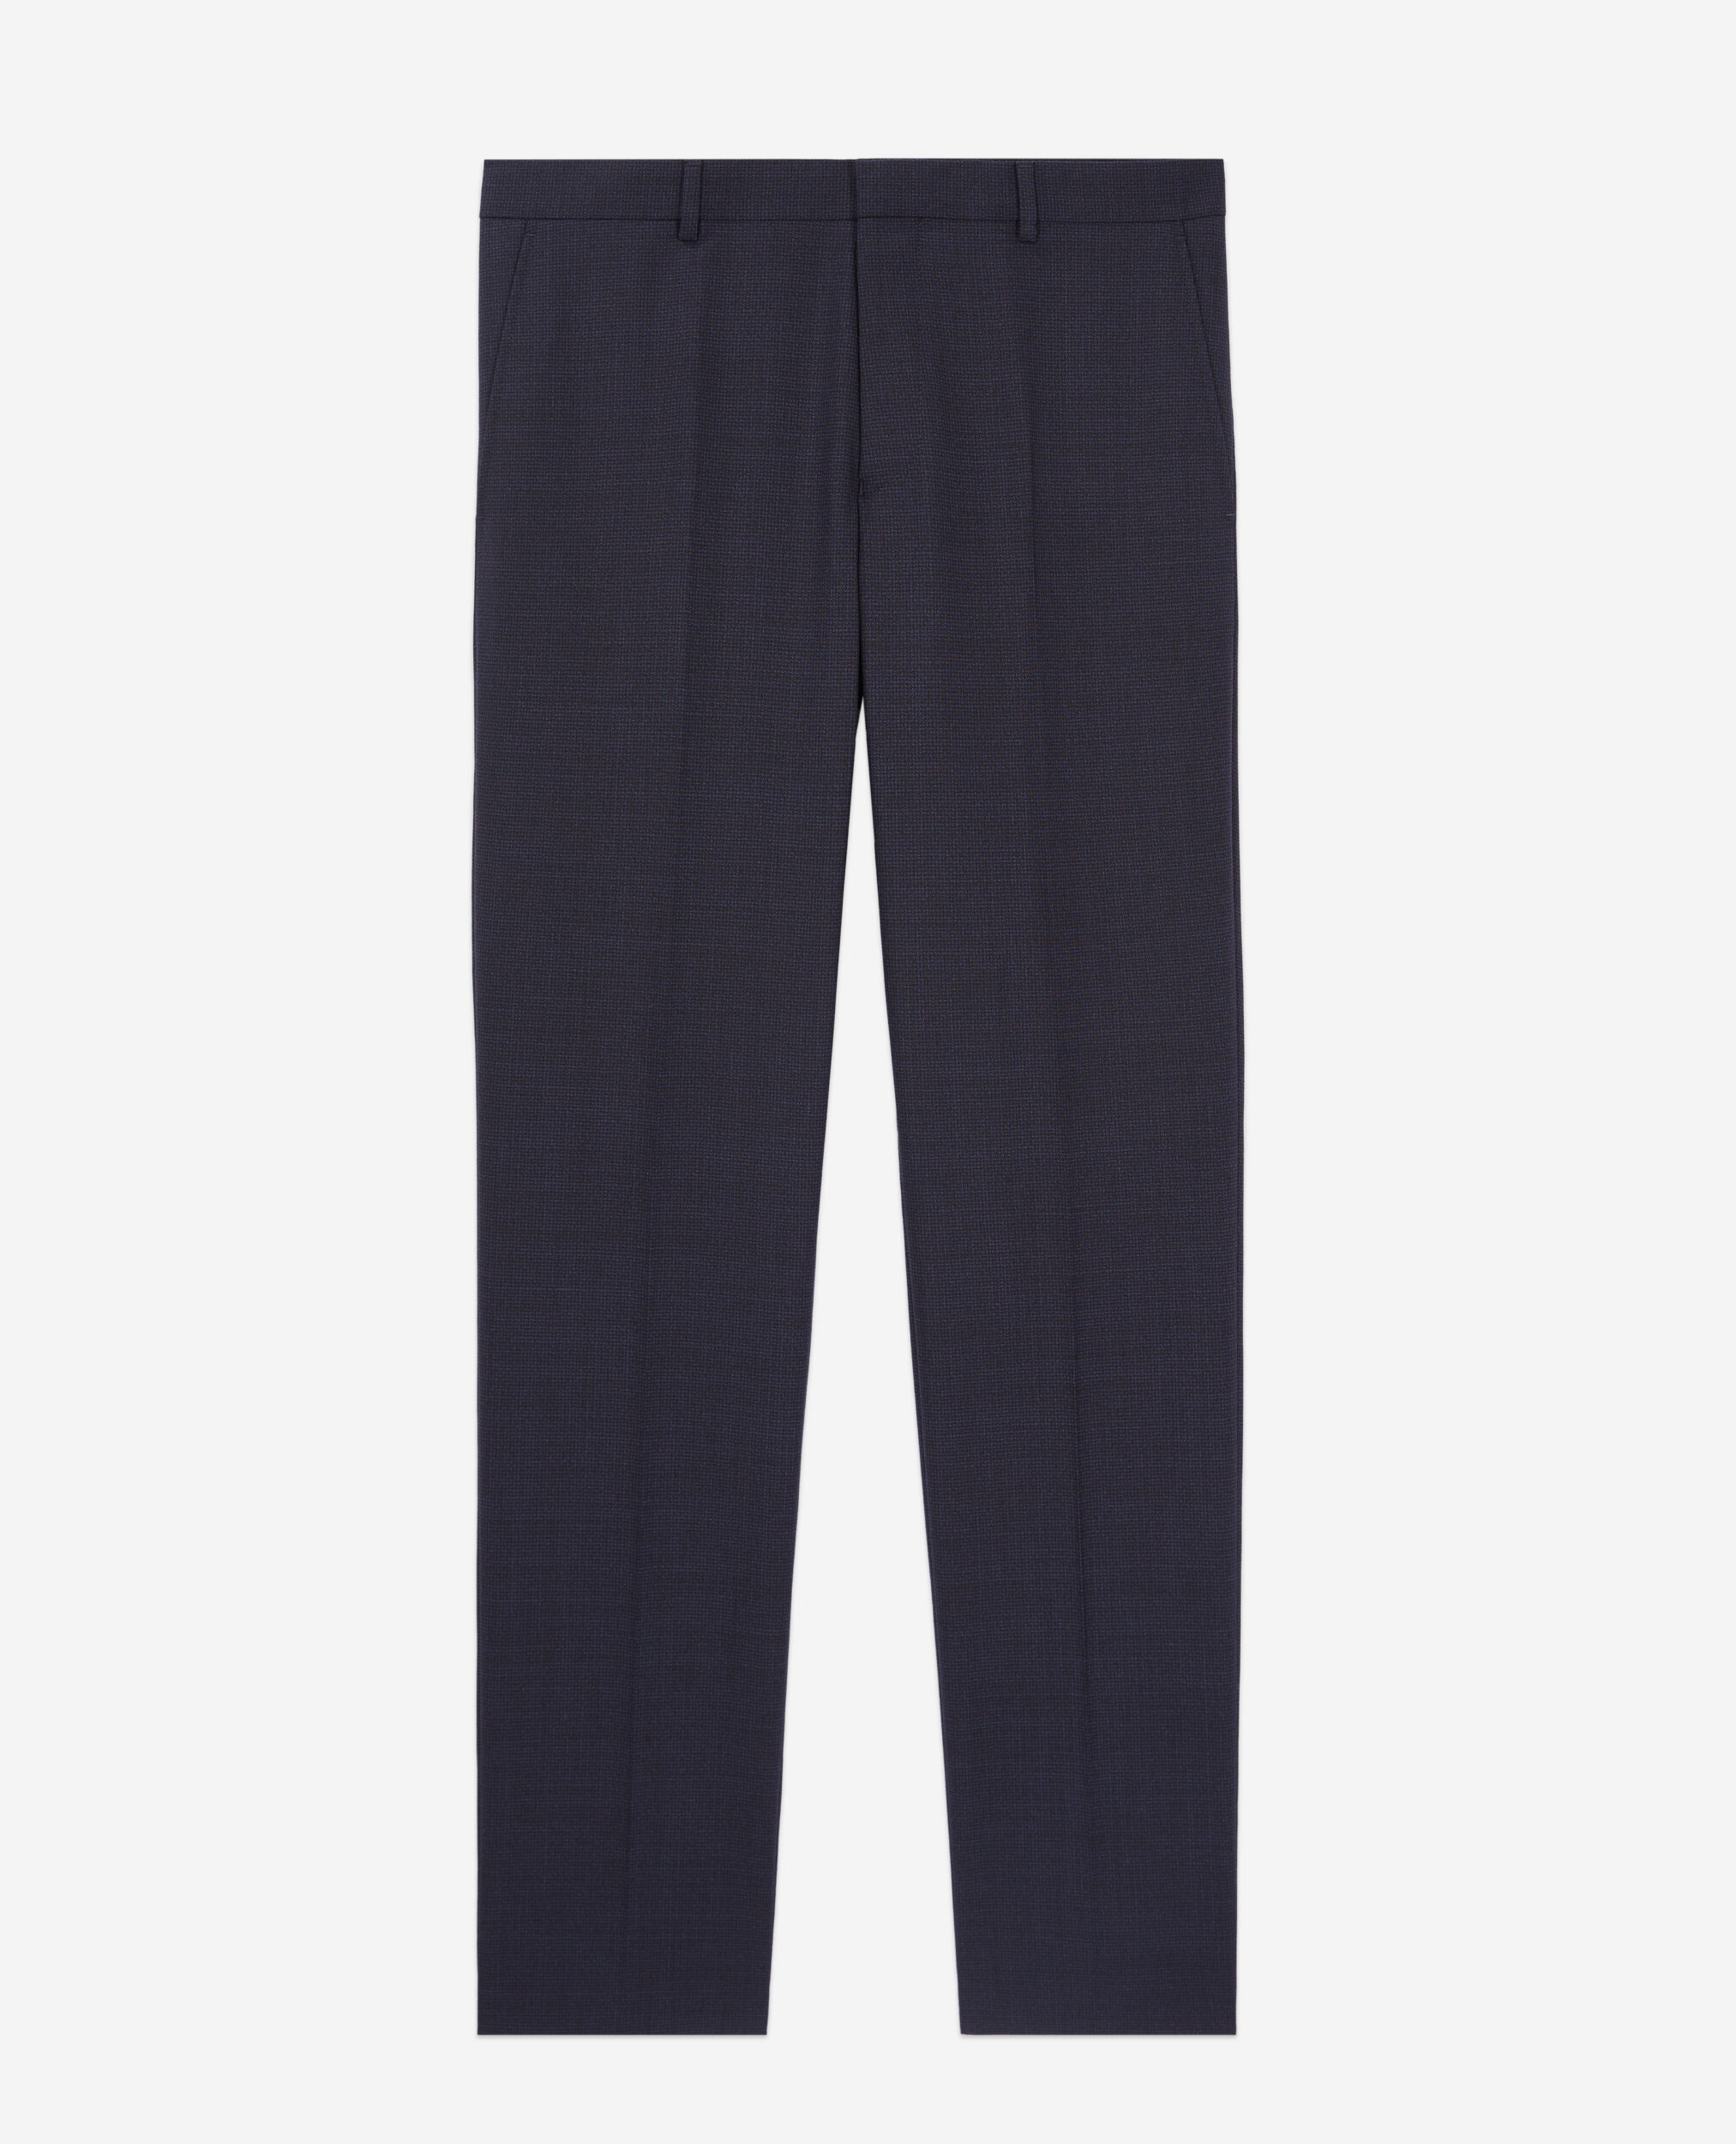 Navy blue micro-pattern wool suit trousers, NAVY / BLACK, hi-res image number null